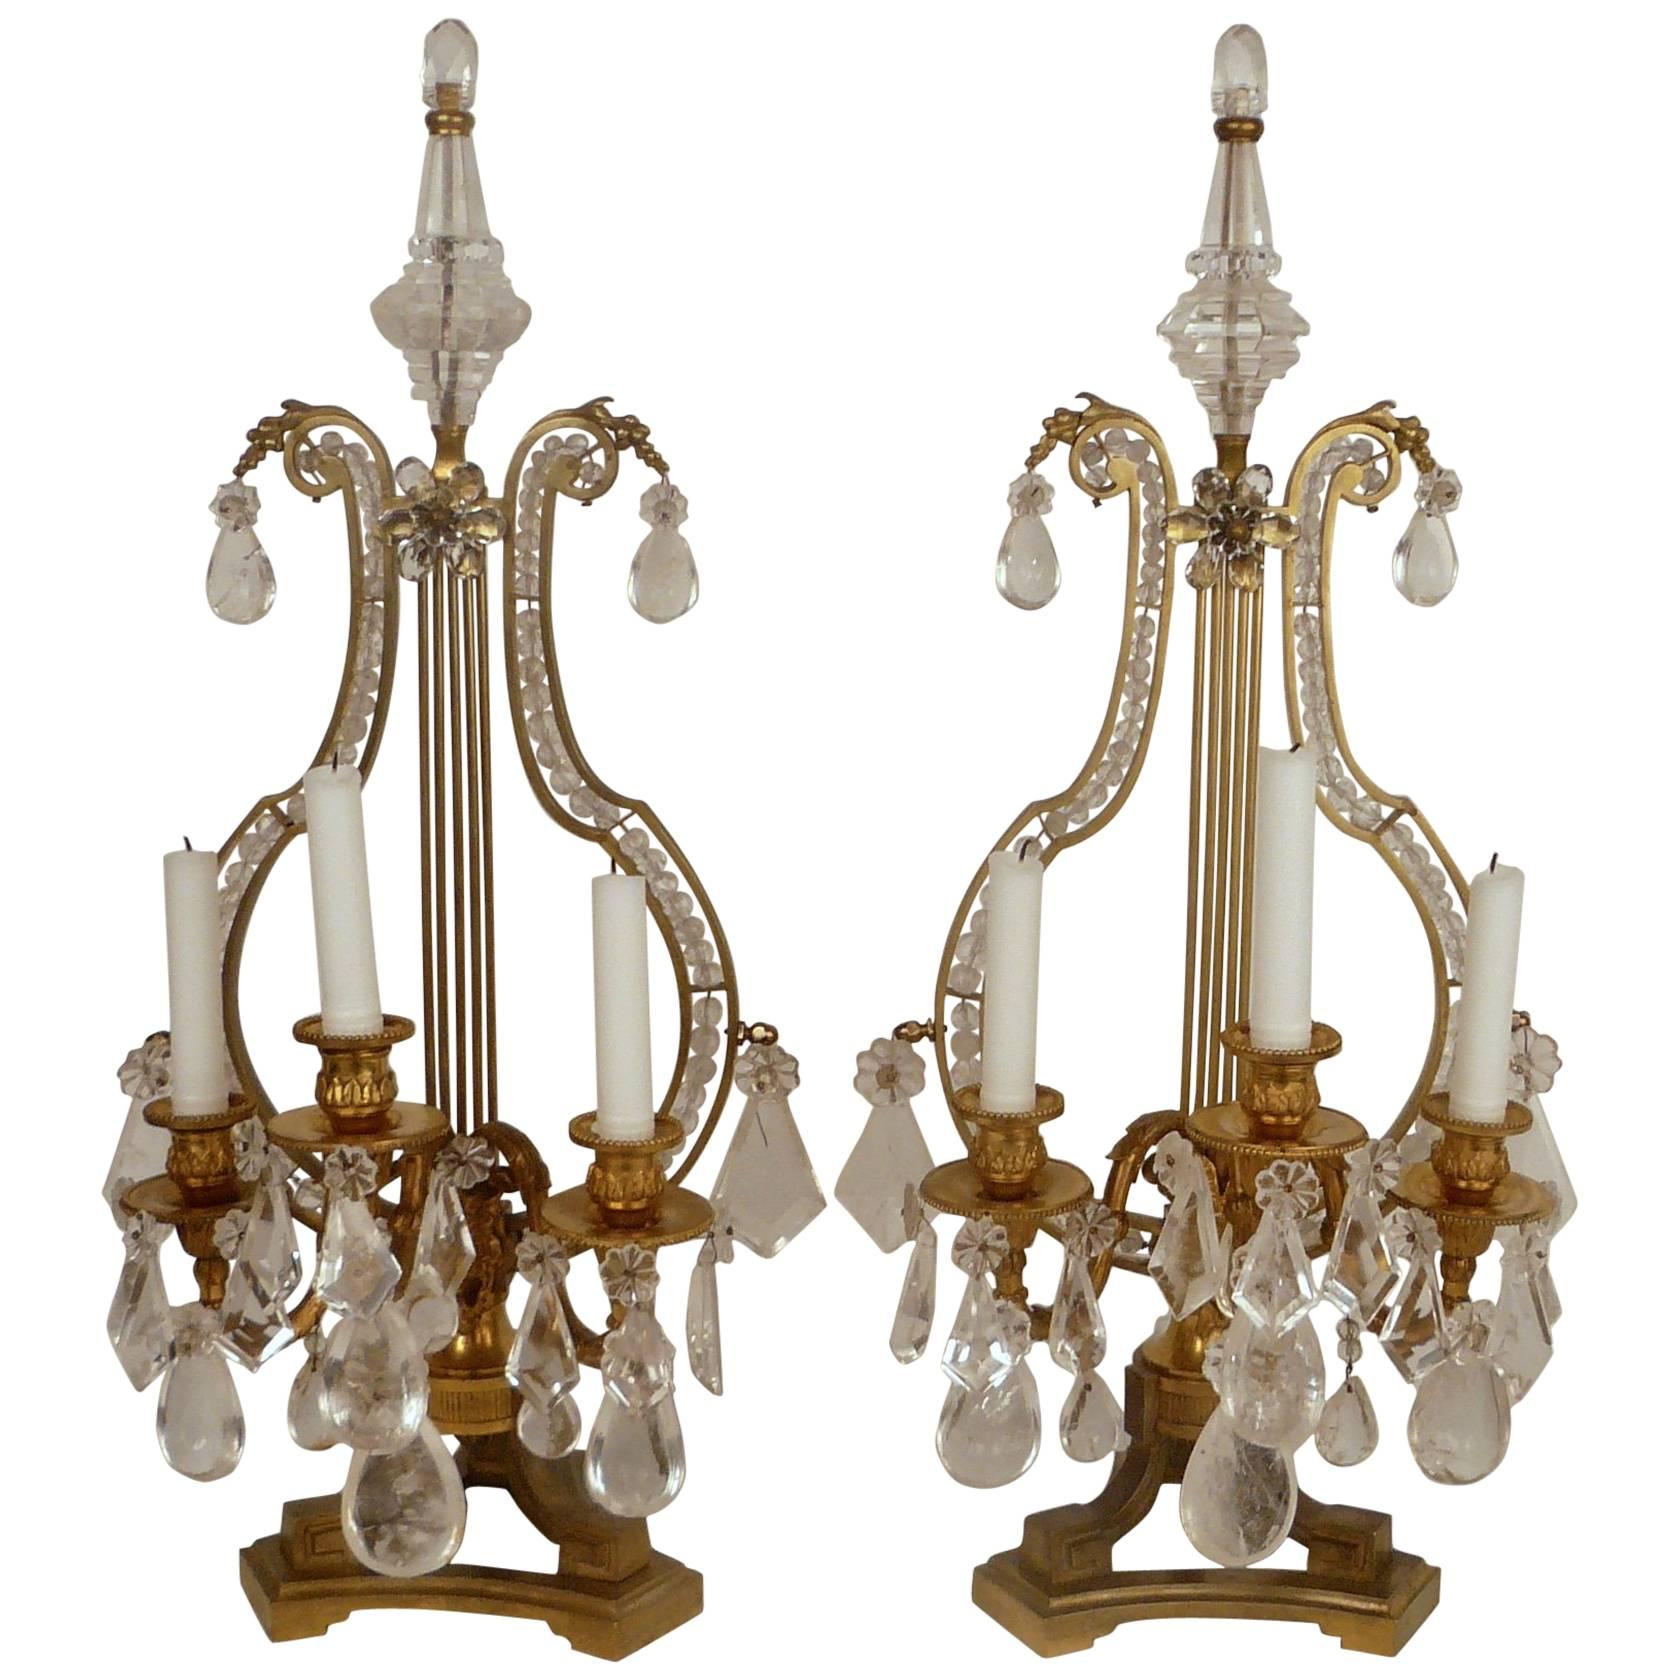 Pair of 19th Century, Louis XVI Style Gilt Bronze and Rock Crystal Candelabra